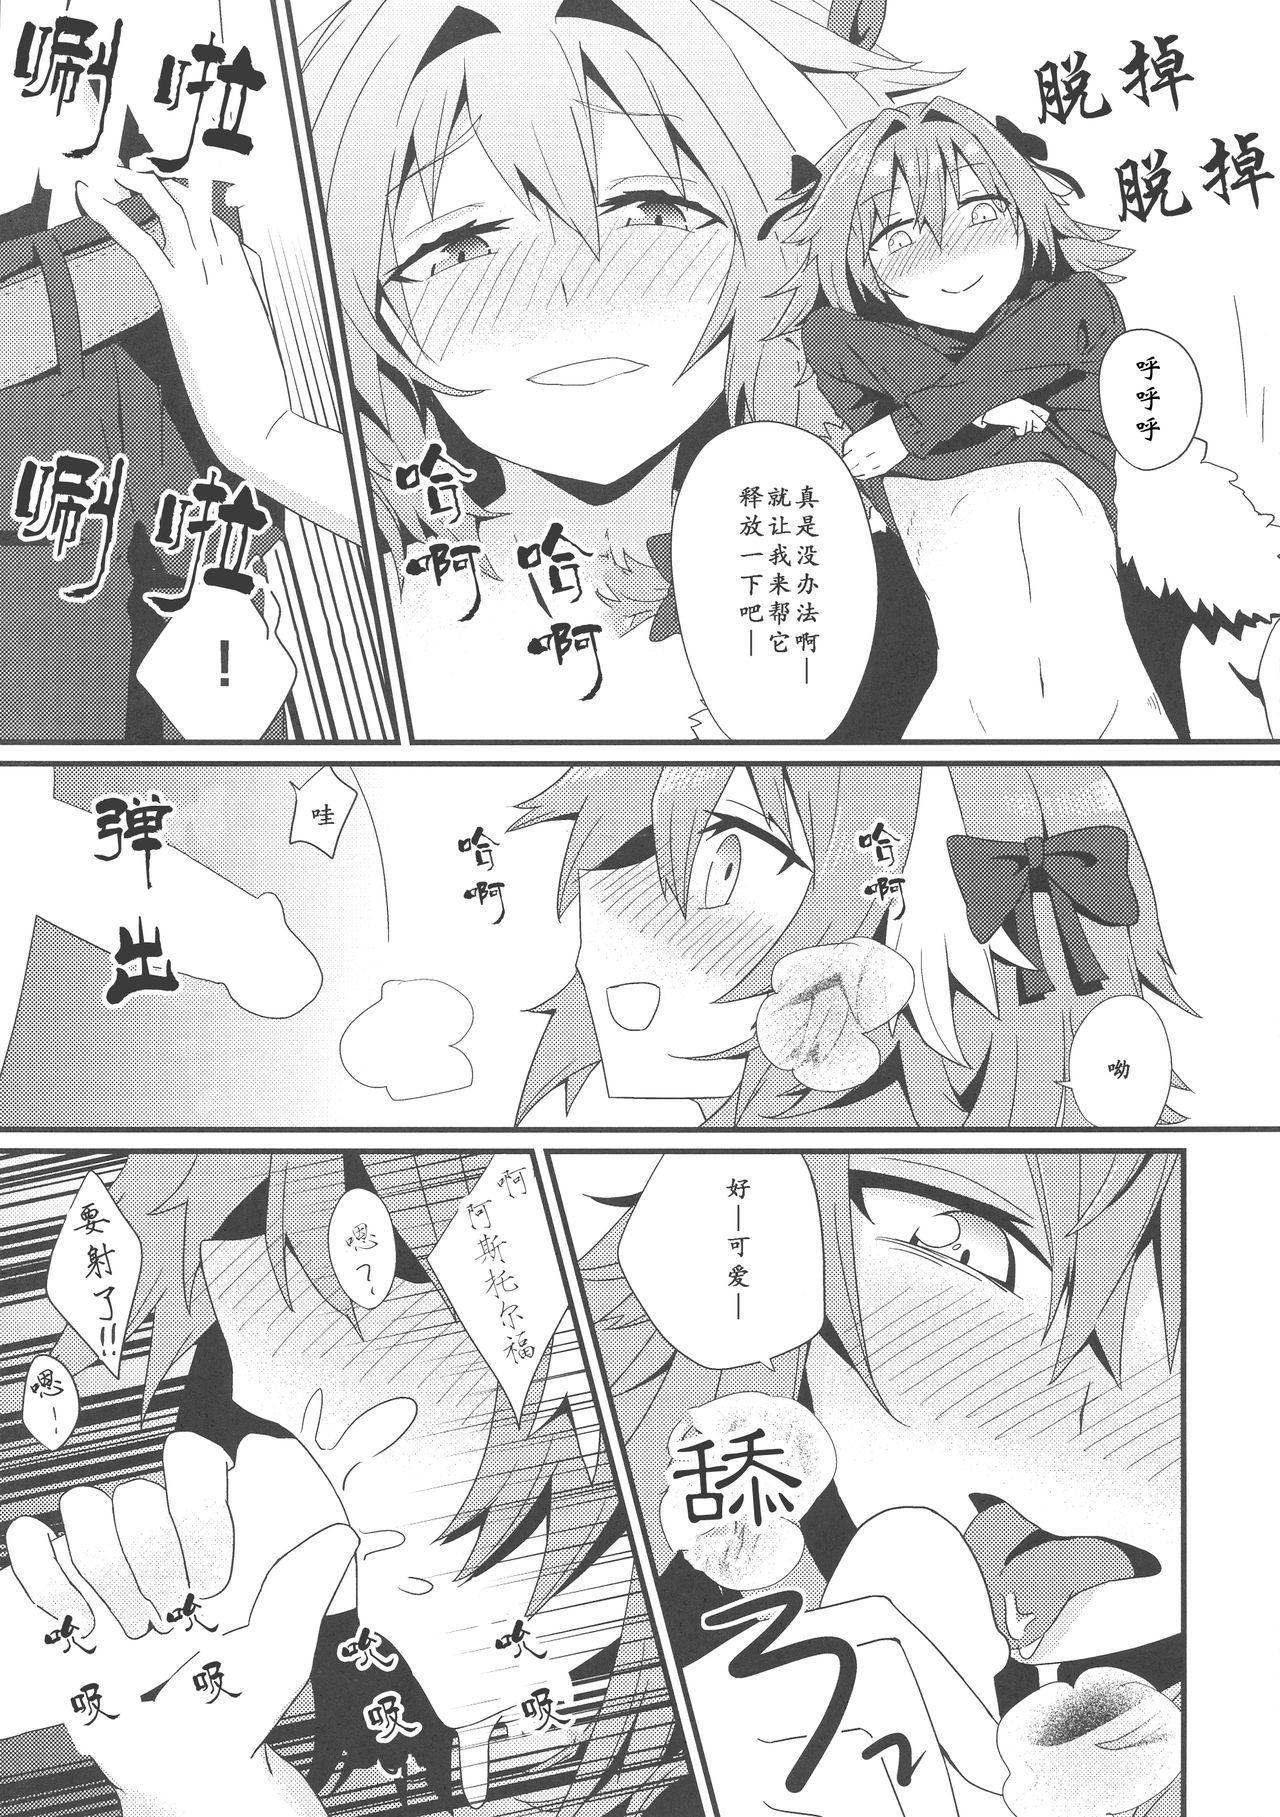 Gay Dudes Astolfo to Yoru no Chaldea - Fate grand order Jacking Off - Page 10